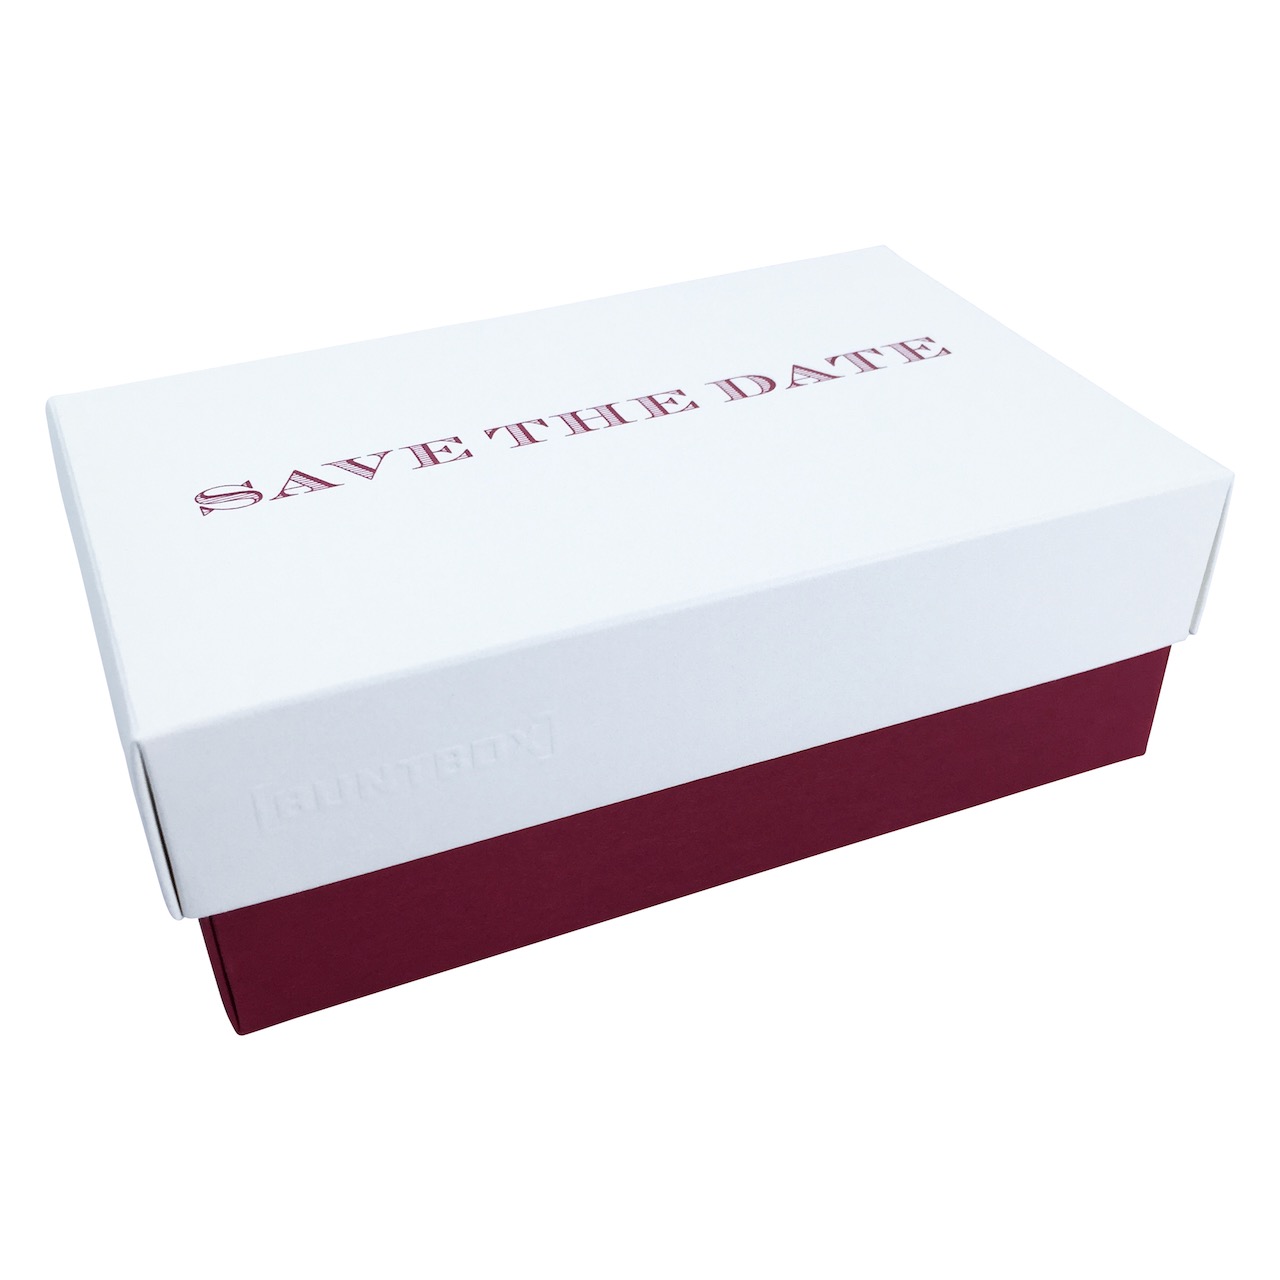 Buntbox XL Fine Paper Save the Date in Champagner-Bordeaux